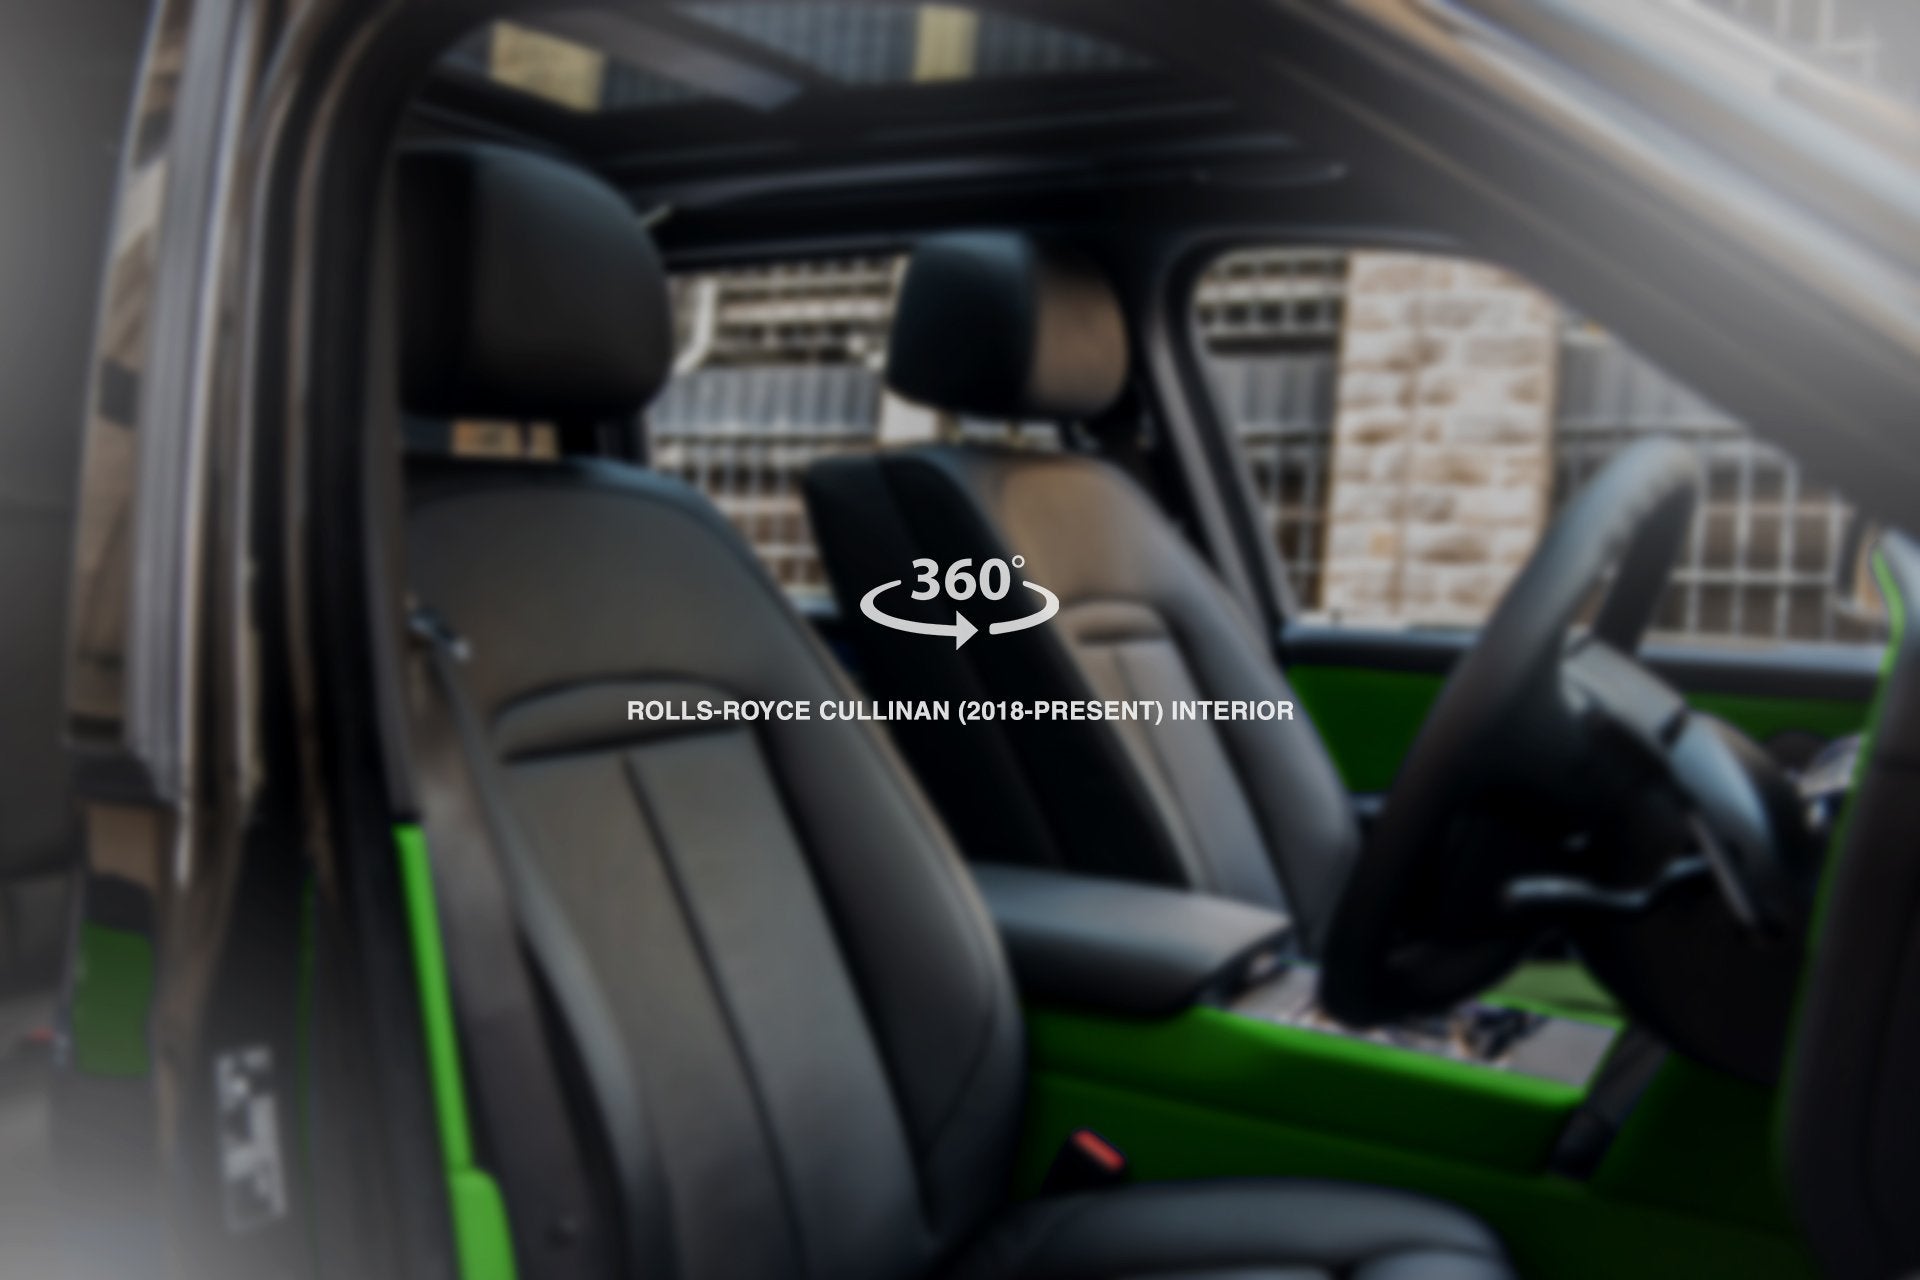 Premium Green Leather Interior 360° Tour for Rolls-Royce Cullinan